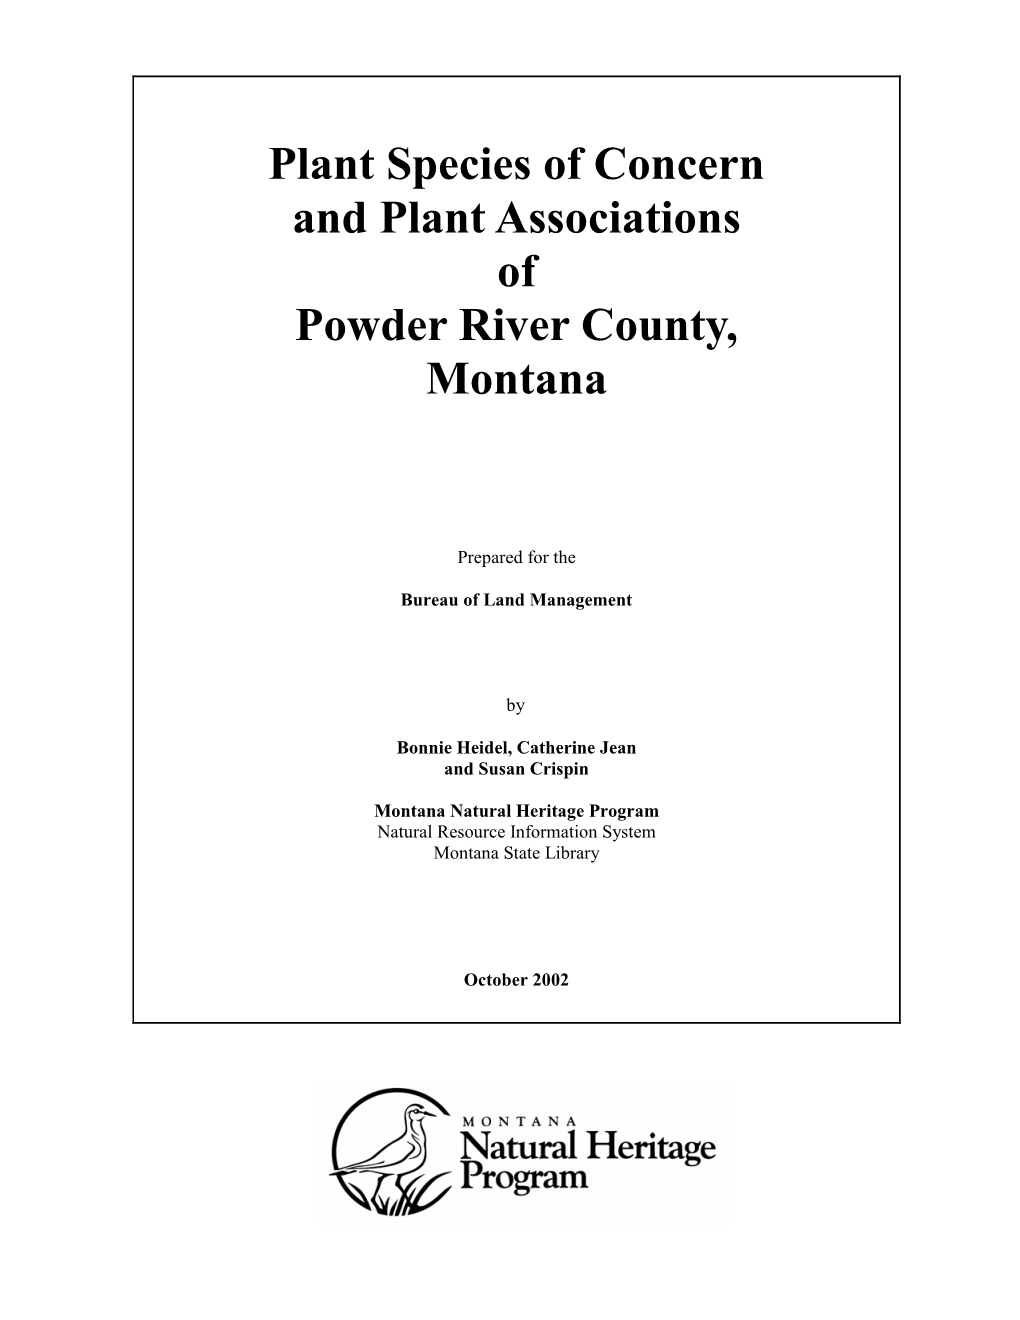 Plant Species of Concern and Plant Associations of Powder River County, Montana